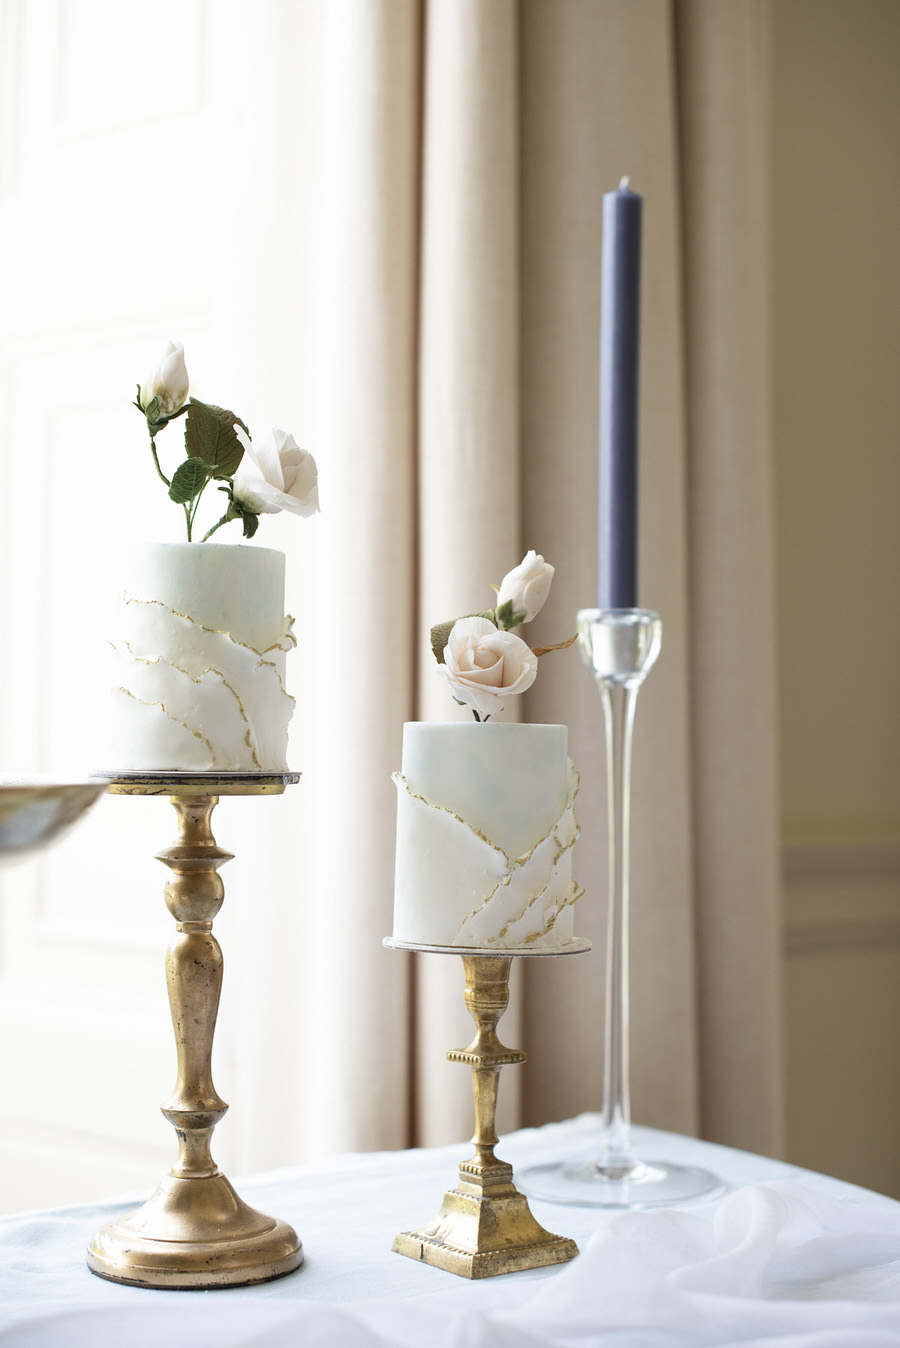 Pynes House wedding styling ideas with Ailsa Munro, Sarah Shuttle and Lottie Ettling PHotography (15)